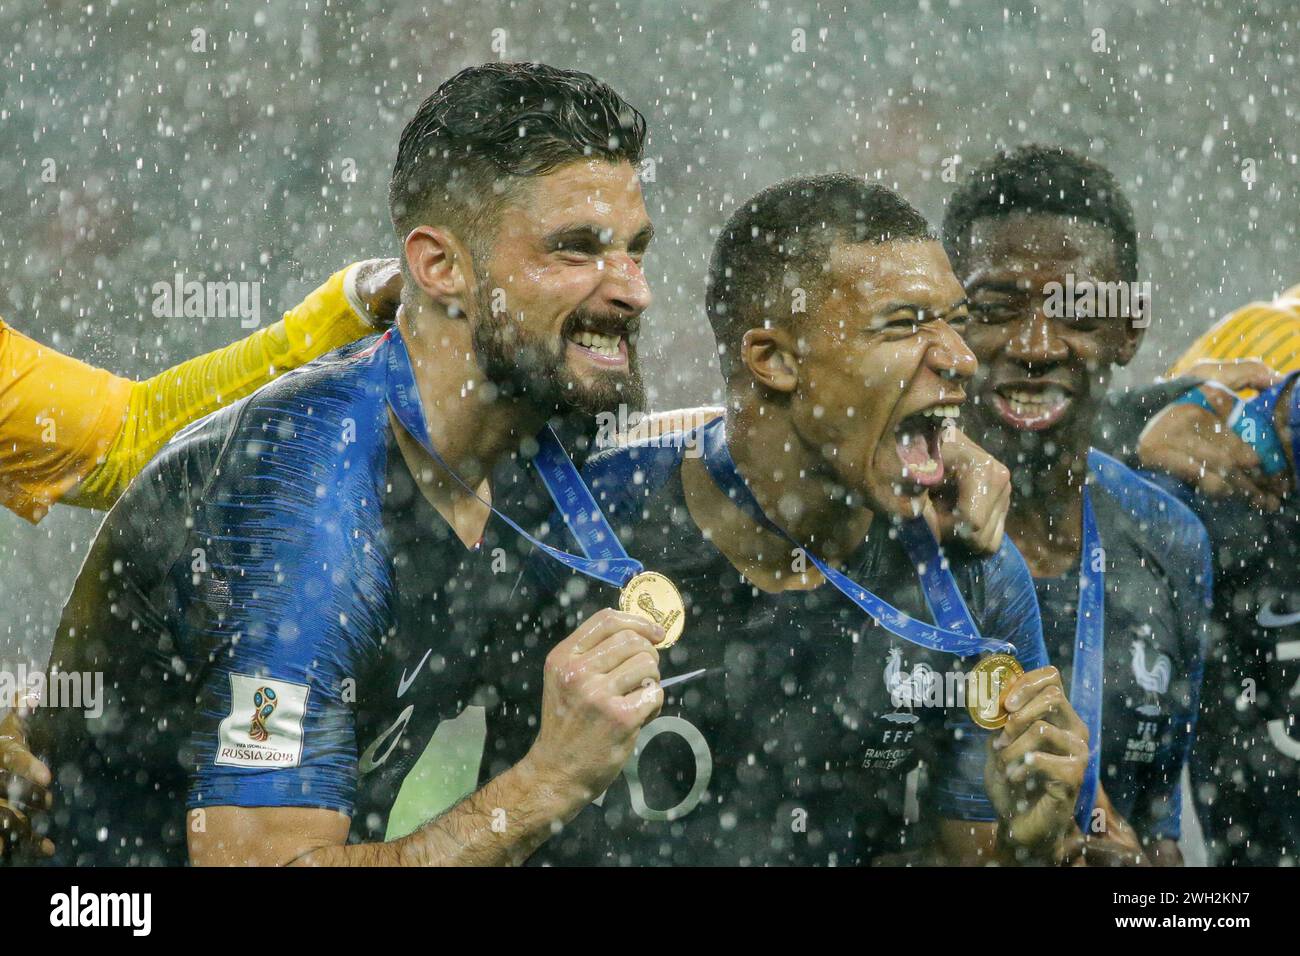 Olivier Giroud of France (L), Kylian Mbappe of France (C) and Ousmane Dembele of France (R) seen with gold medals of the world championships  during the FIFA World Cup 2018 Final match between France and Croatia at Luzhniki Stadium. Final score: France 4:2 Croatia. (Photo by Grzegorz Wajda / SOPA Images/Sipa USA) Stock Photo